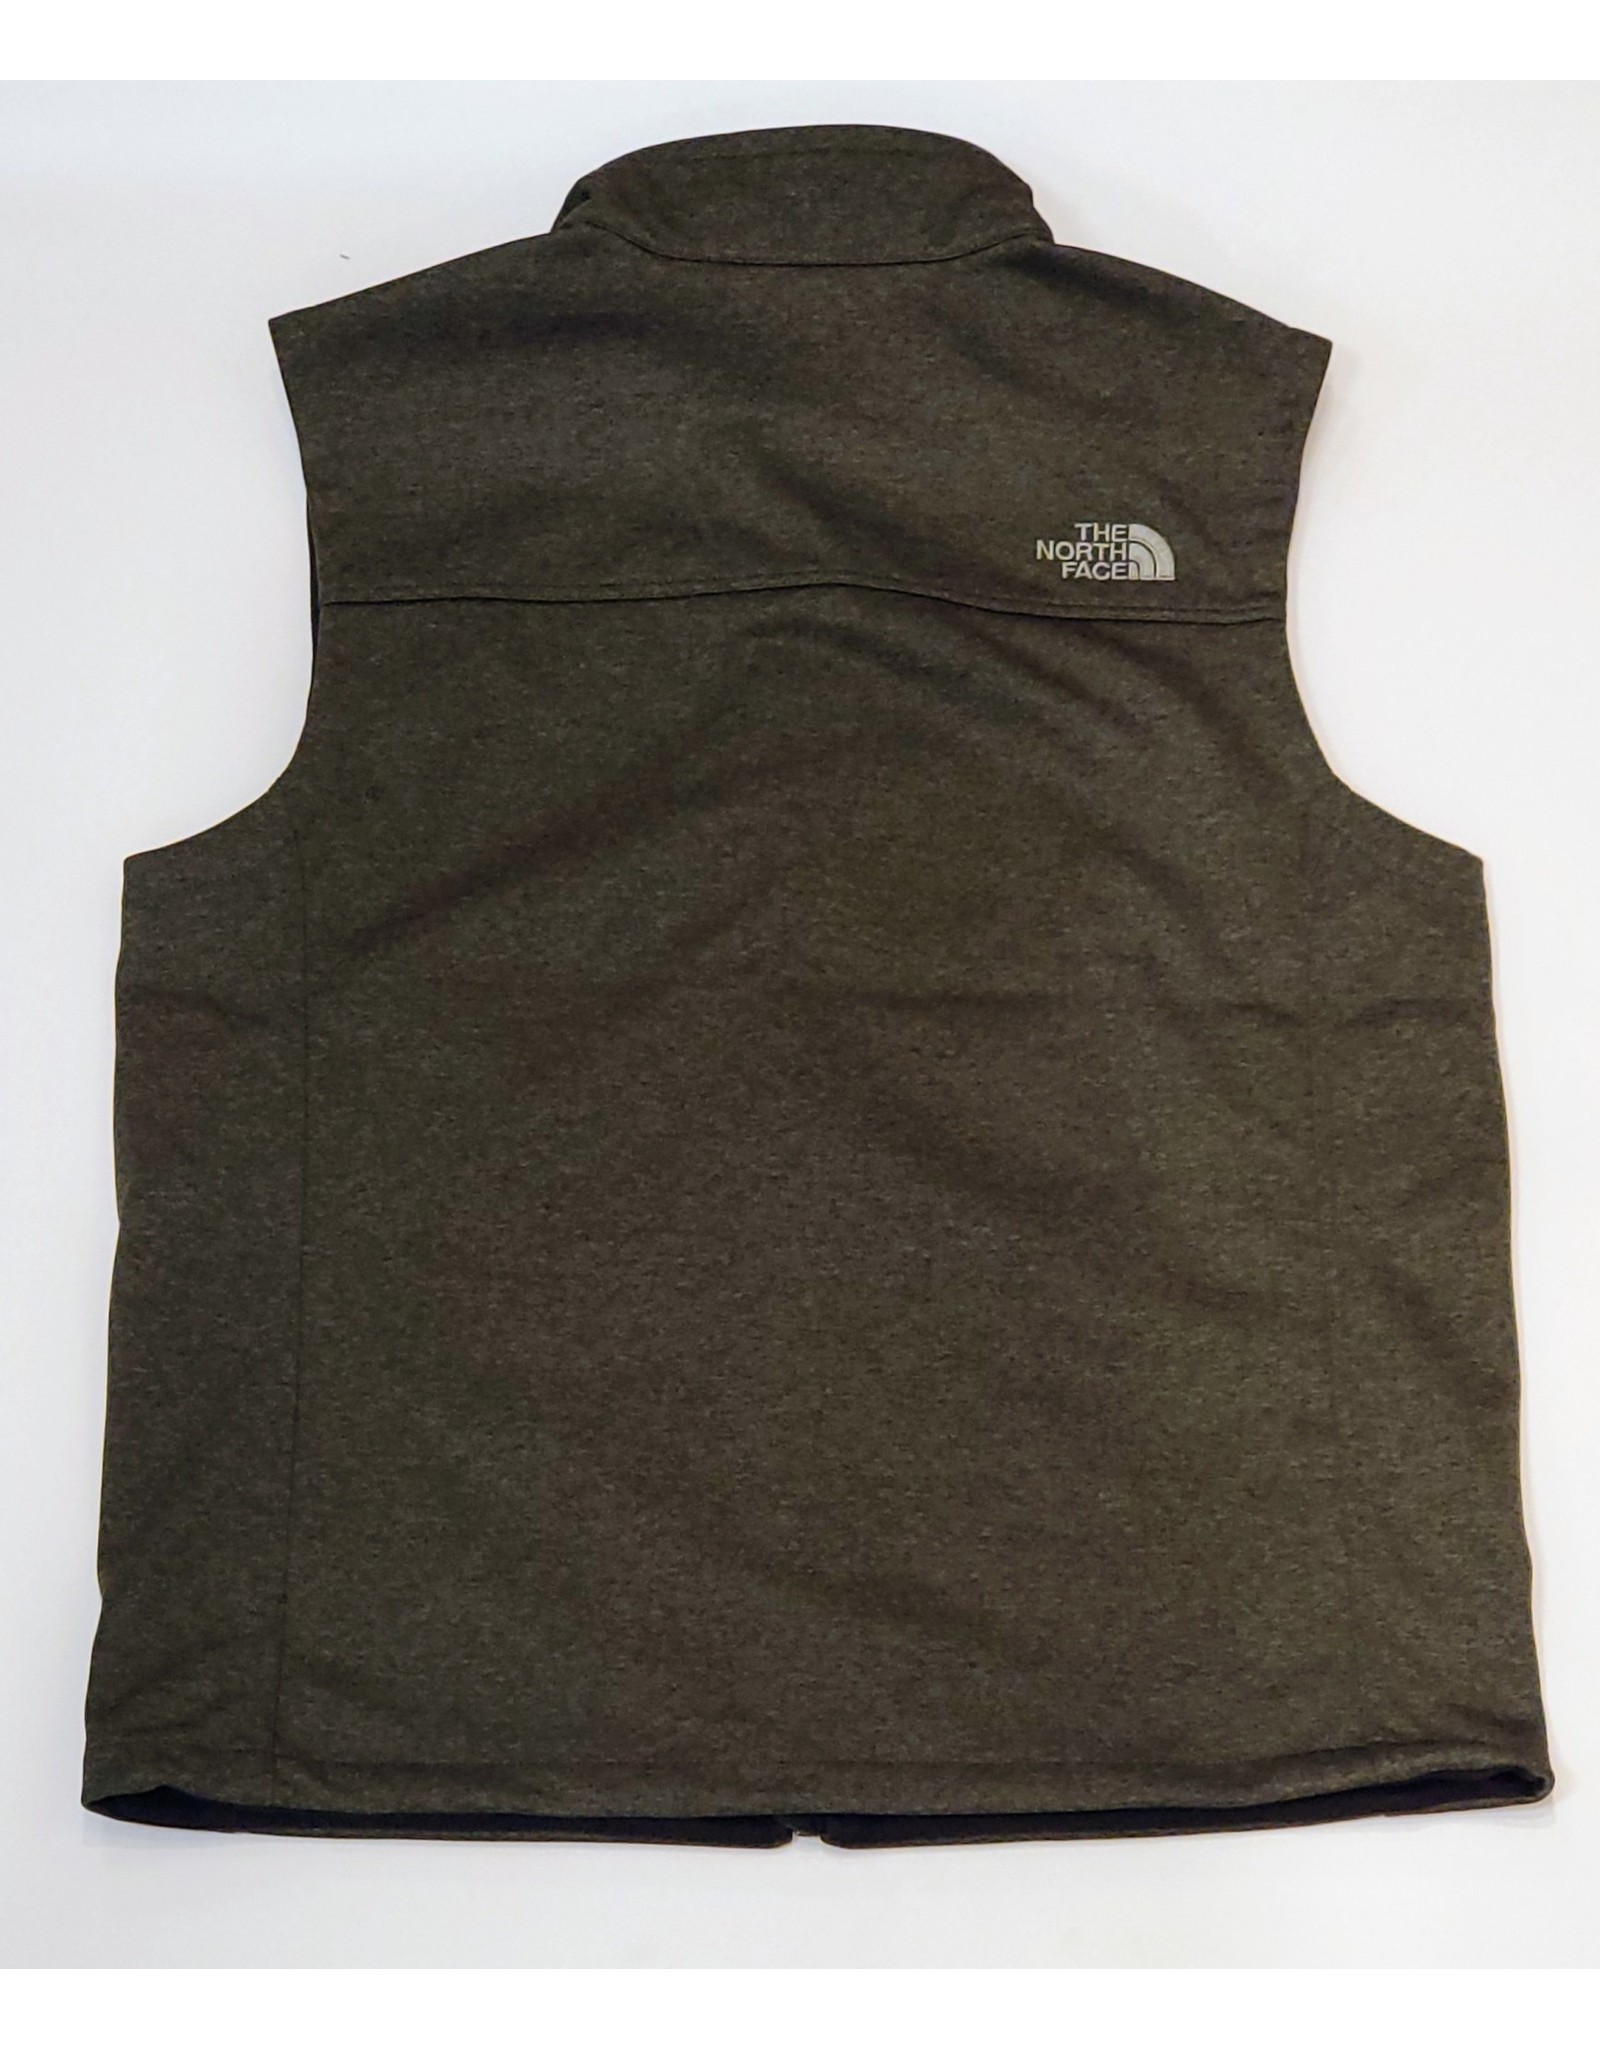 NORTH FACE NORTH FACE RIDGEWALL SOFT SHELL VEST - HEATHER GREY